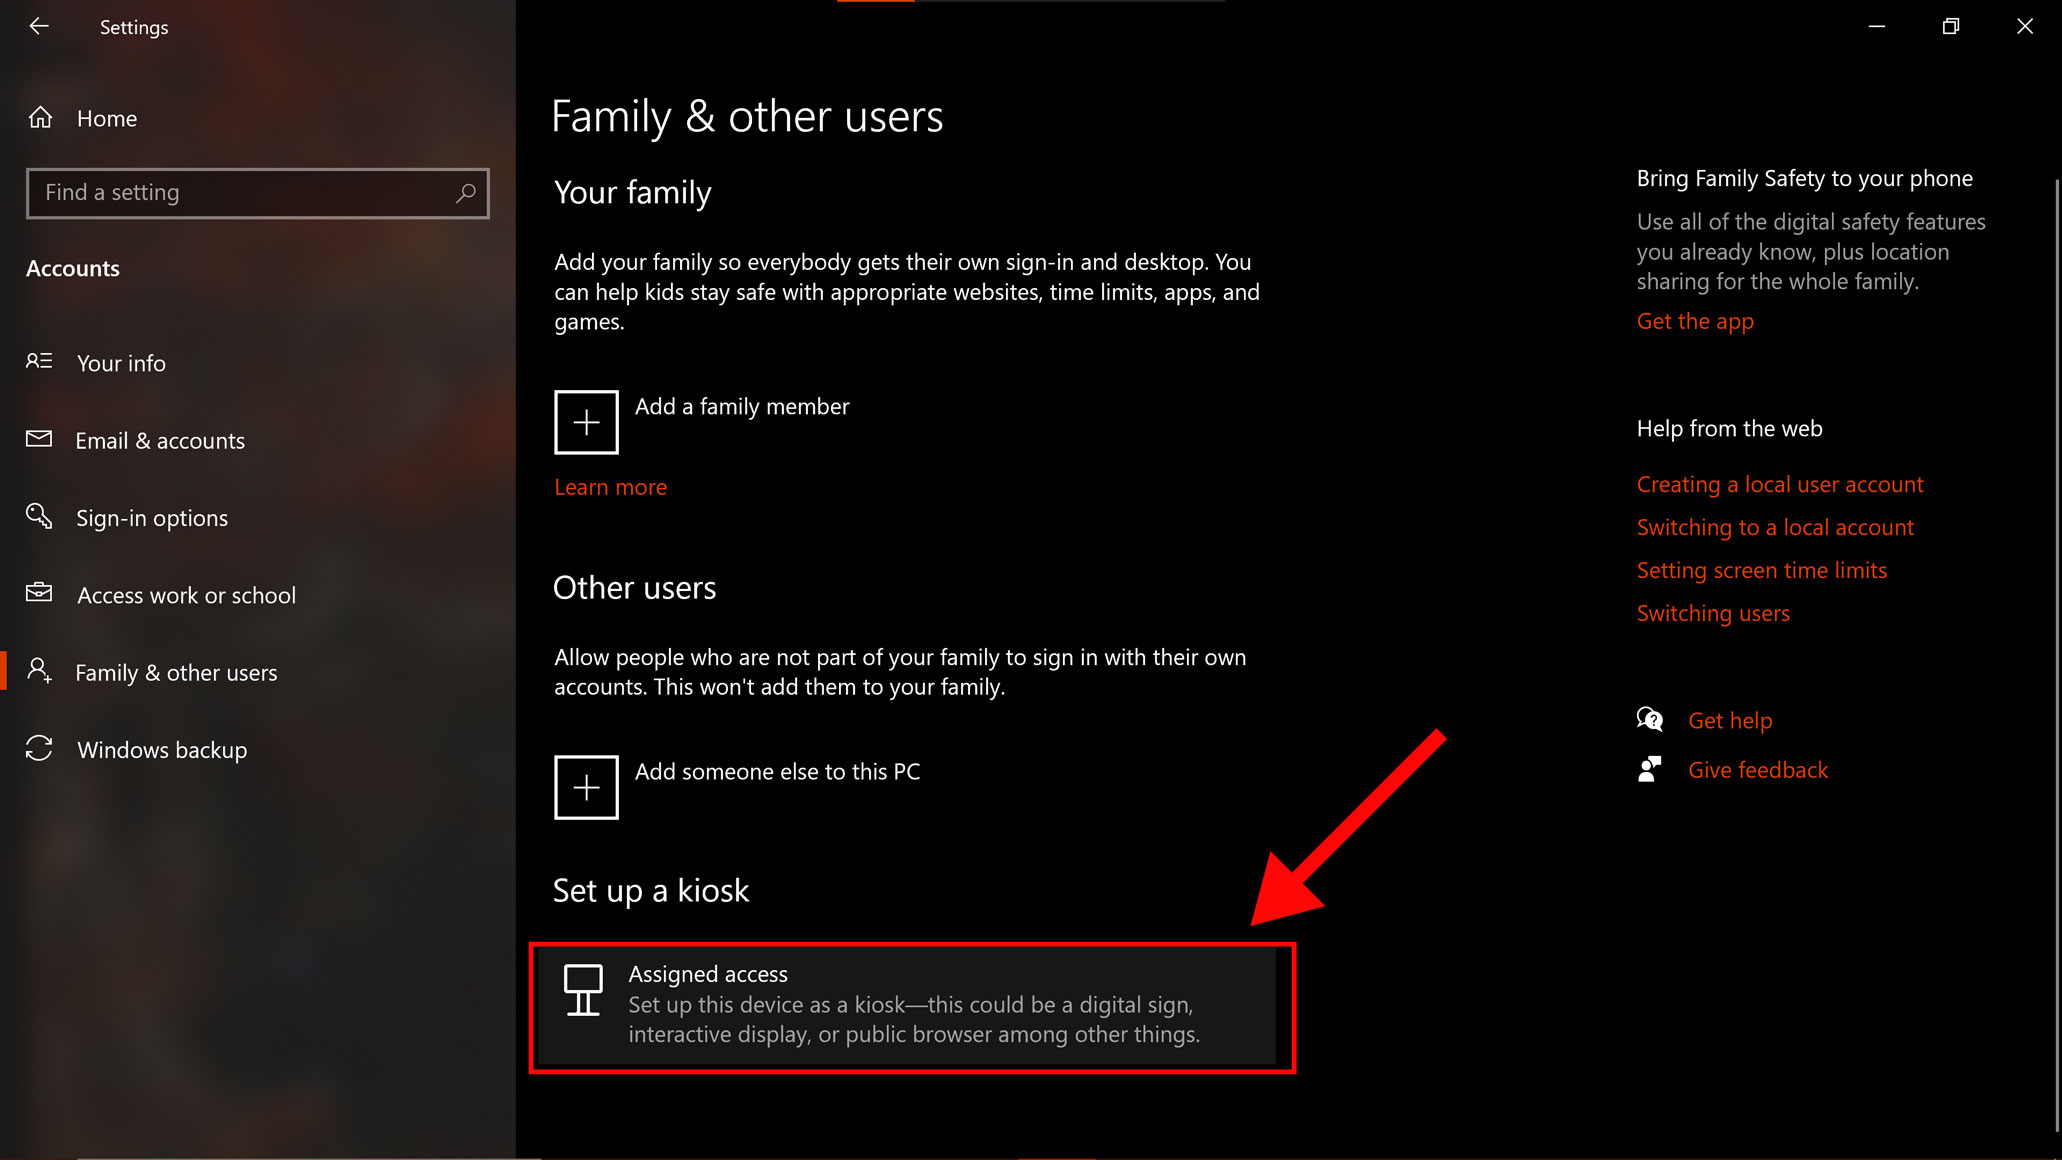 Screenshot of the Windows “Family and other users” window. Toward the bottom, underneath the “Set up a kiosk” section, a large red arrow points to the "Assigned access" option, which is highlighted by a red rectangle.